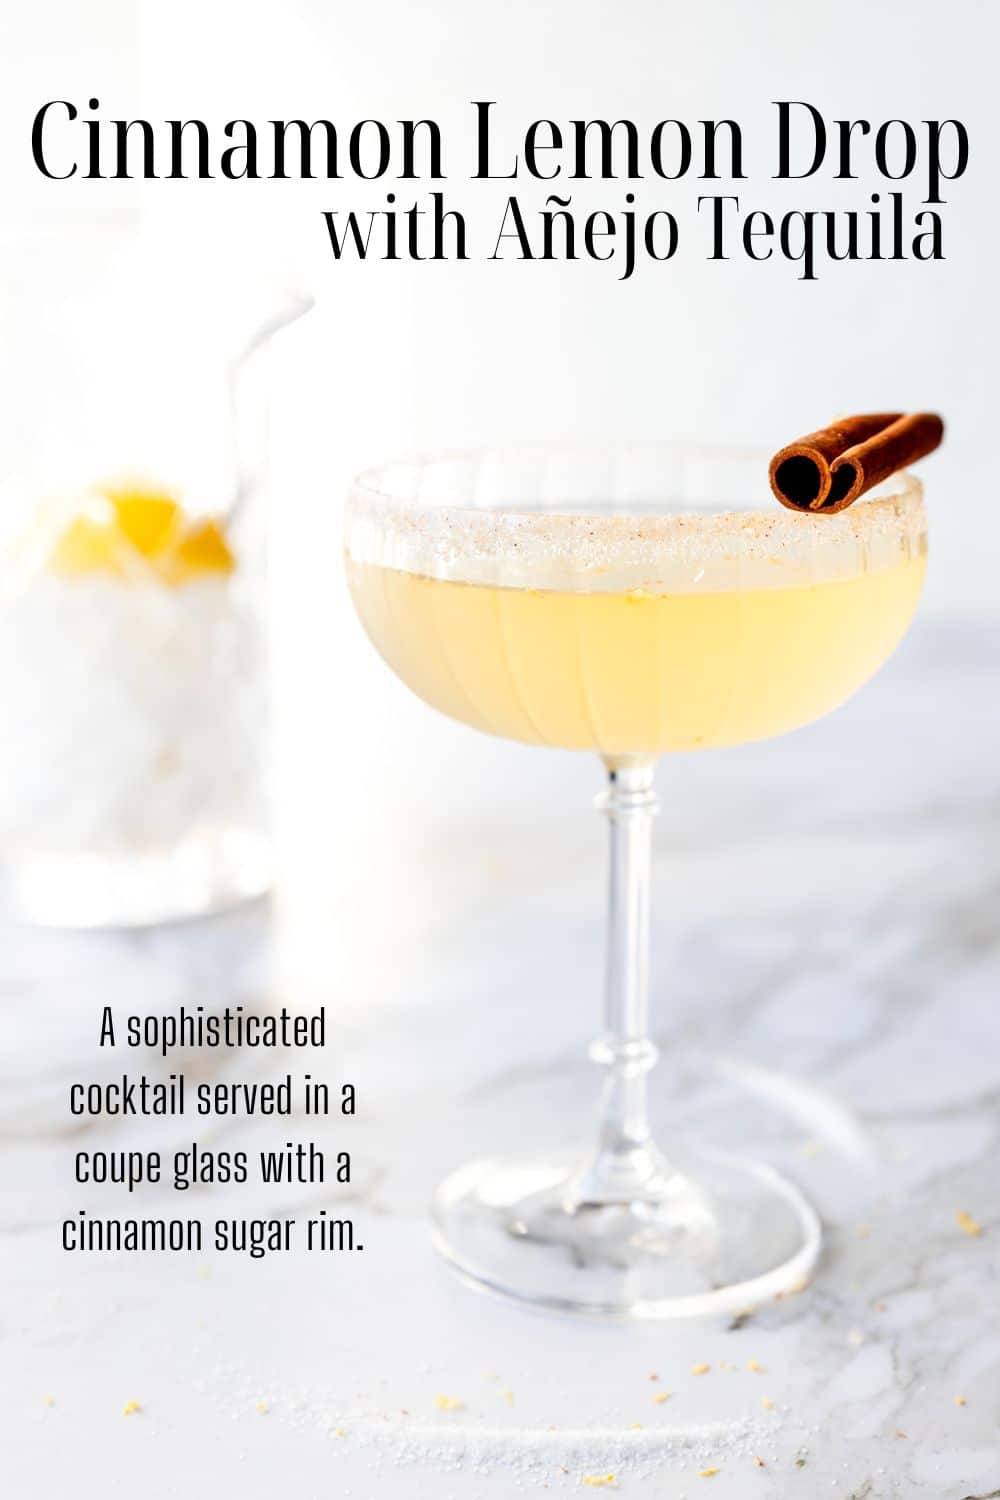 Cinnamon lemon drop cocktail made with Anejo Tequila with text overlay for Pinterest